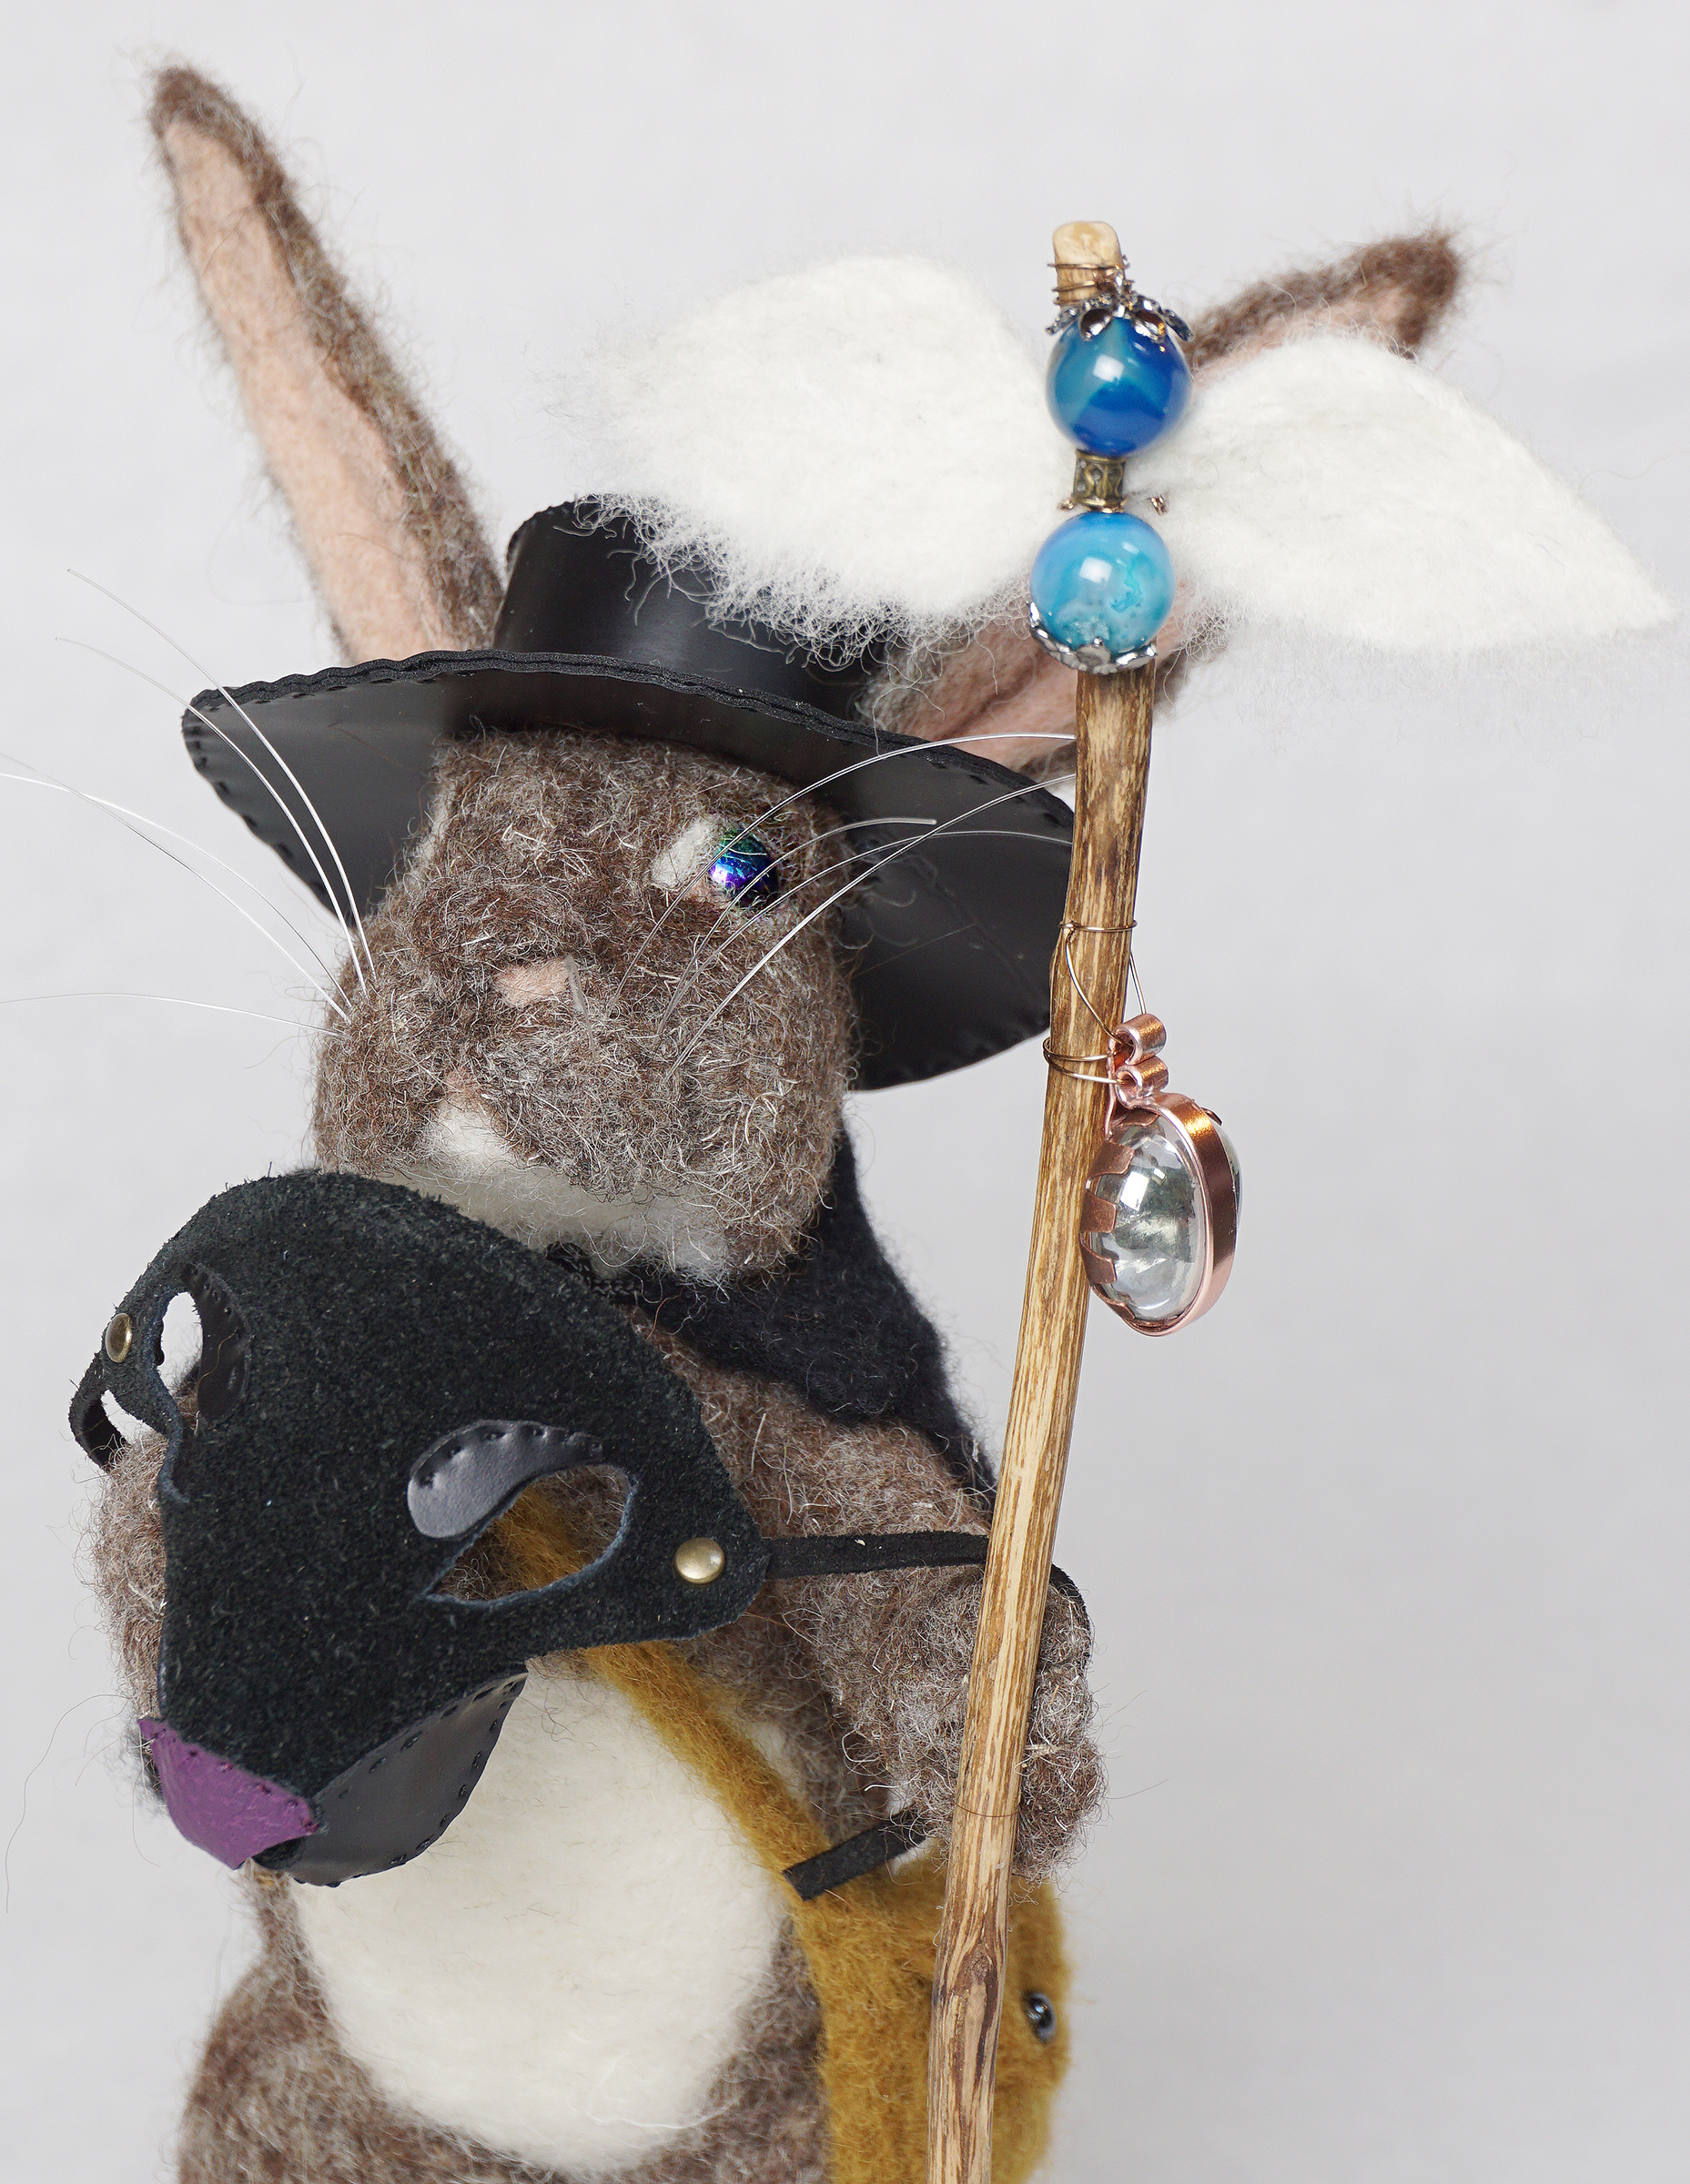 What's Up Doc is an anthropomorphic rabbit plague doctor art doll sculpture. Needle felted wool over wire and batting armature, glass bead, faux leather and suede embellishment.